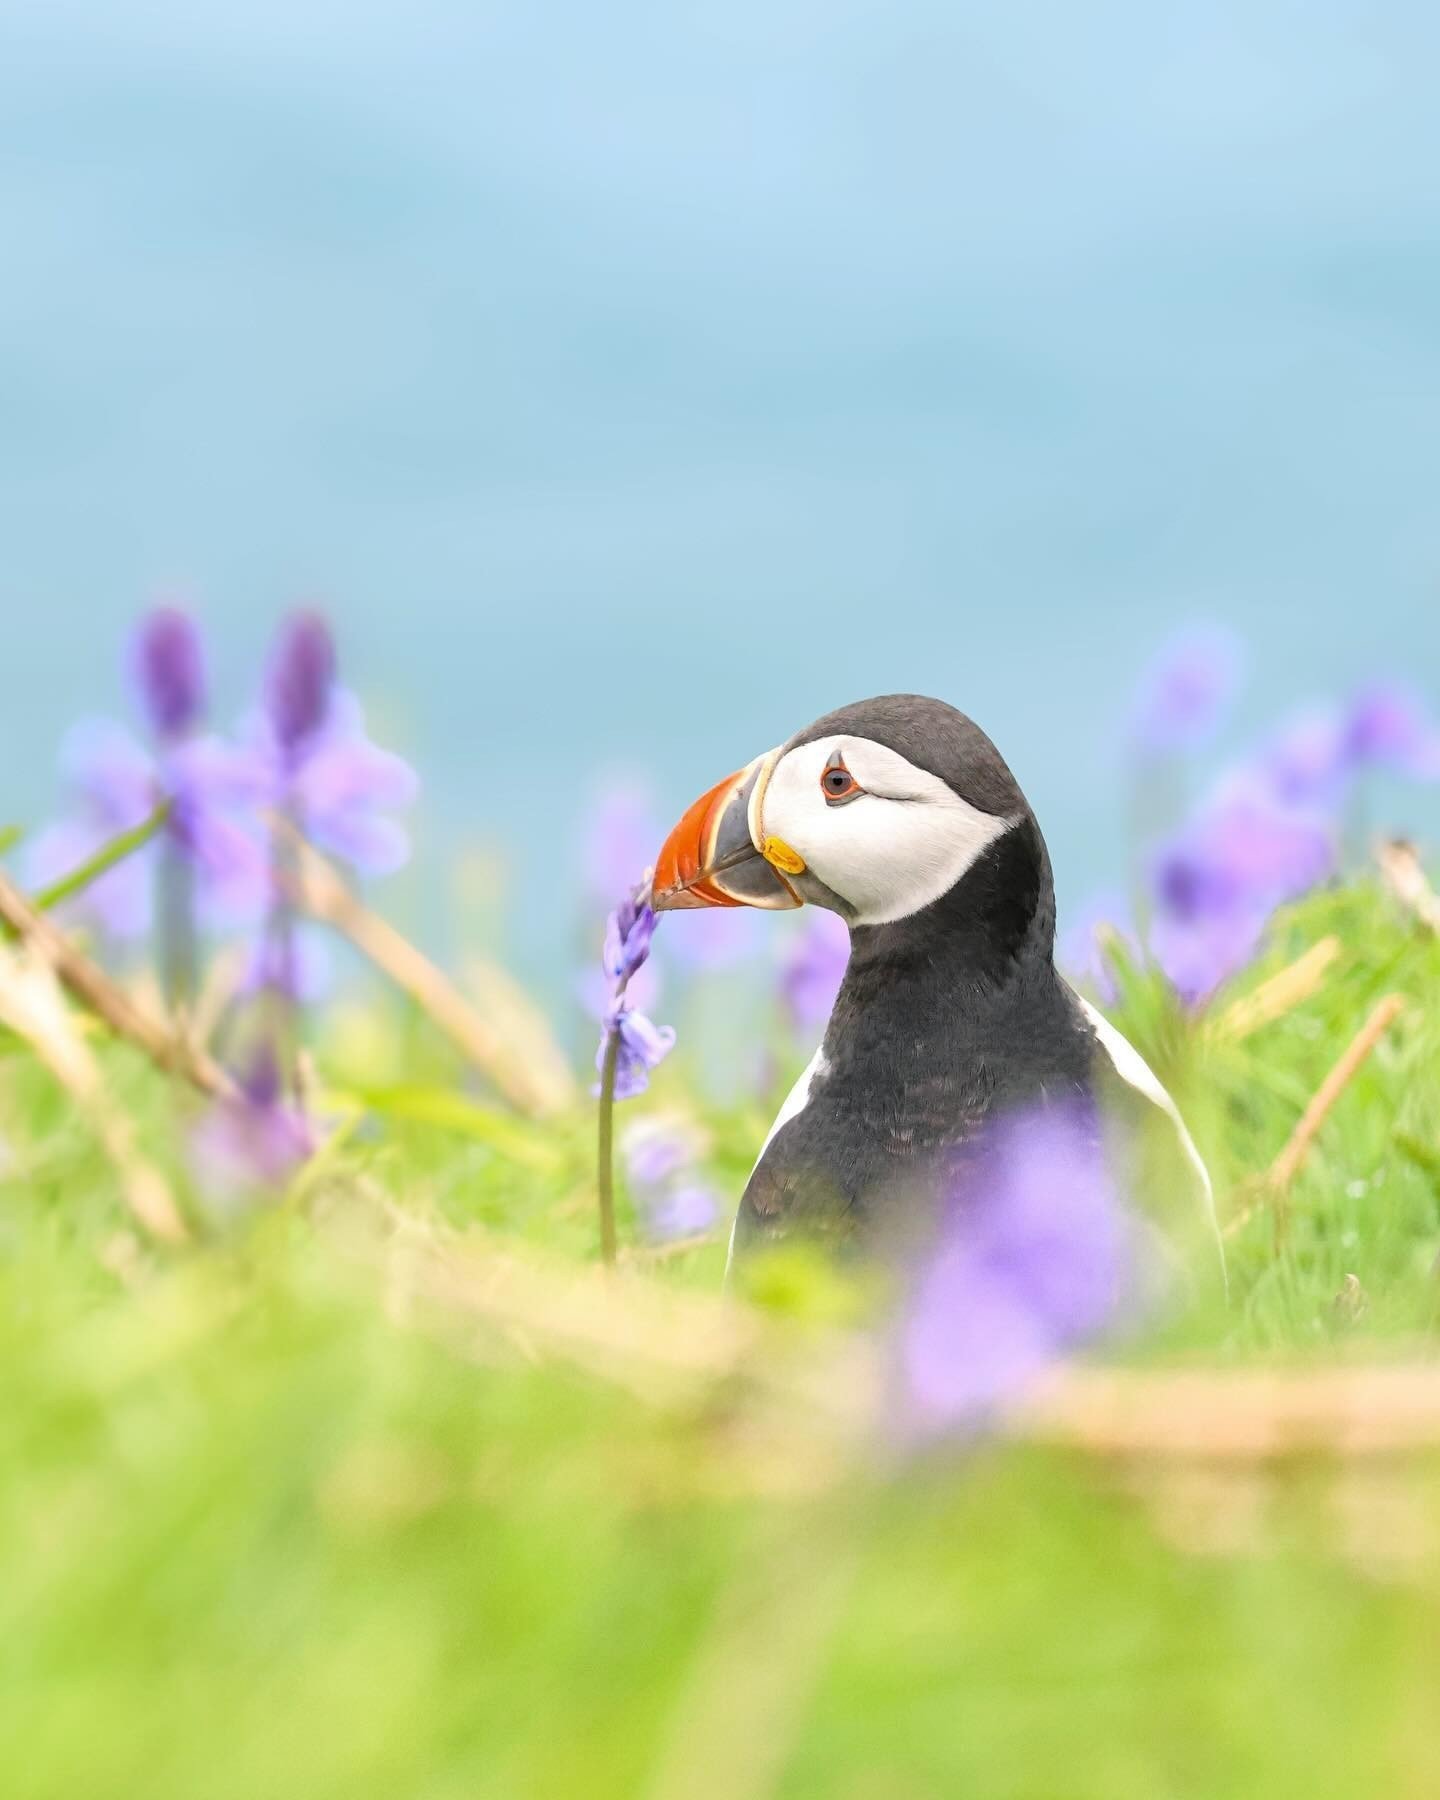 Photo of the Day: Puffins with Bluebells (Fratercula arctica and Hyacinthoides non-scripta), taken by @capture_nature_emily_taylor 💜📷⁠
⁠⁠
To submit an image to our Conker Nature Photo of the Day, use our hashtag #conkernaturePOTD to be featured. 🎉